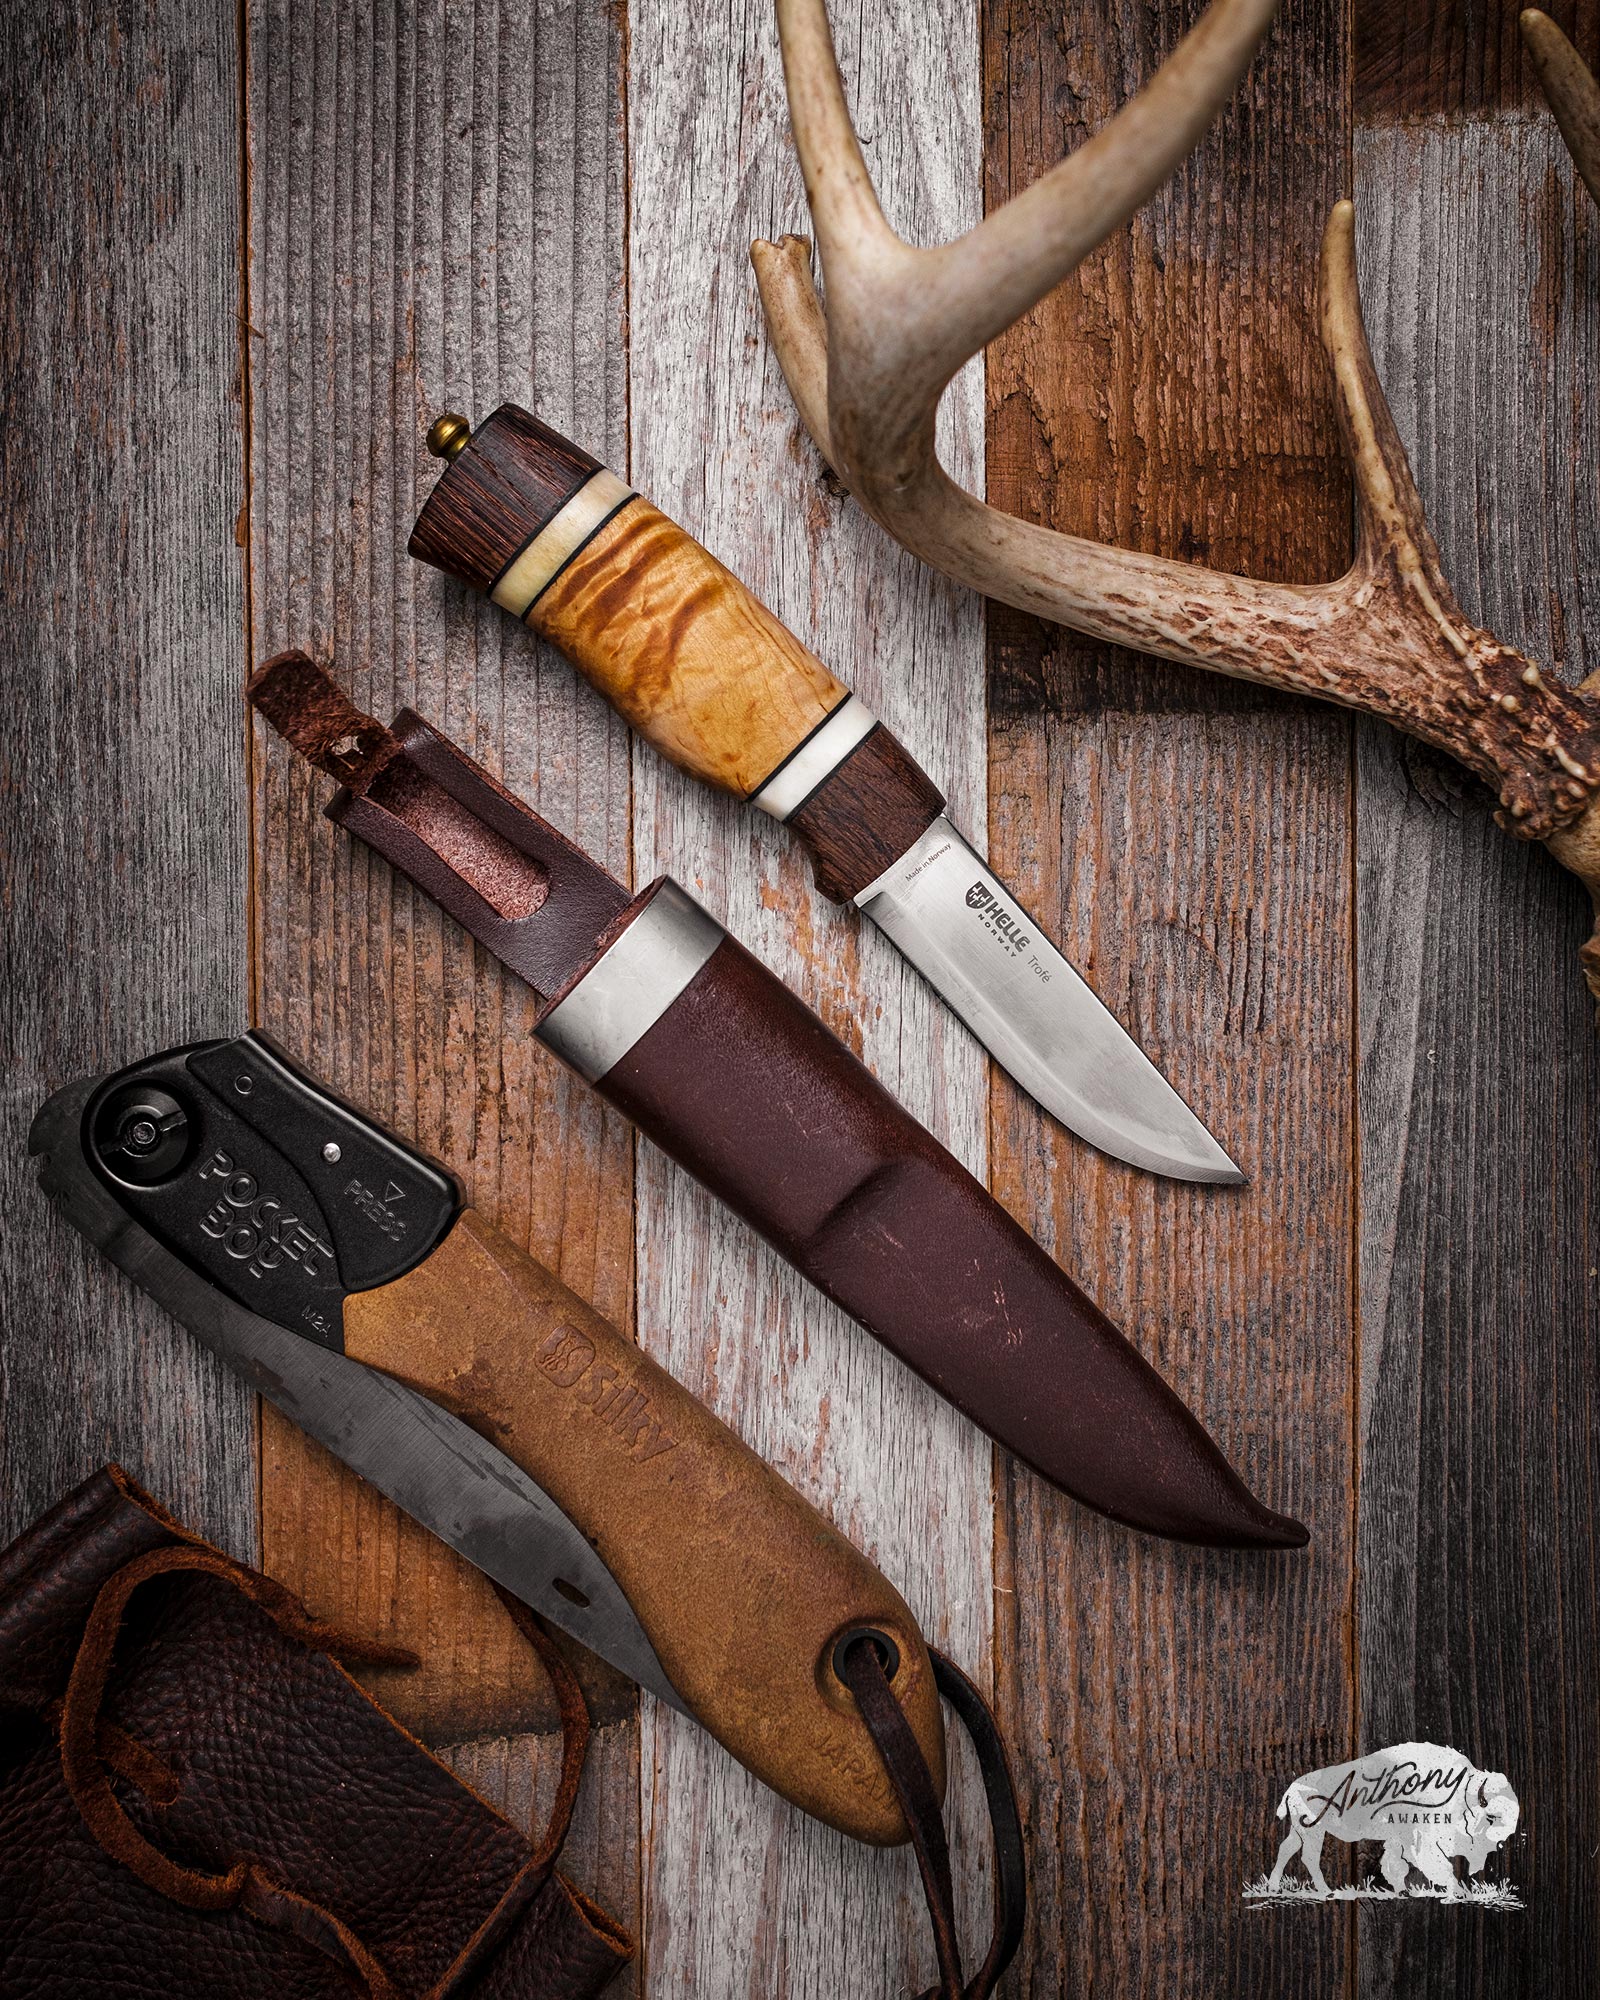 Helle Trofe Review